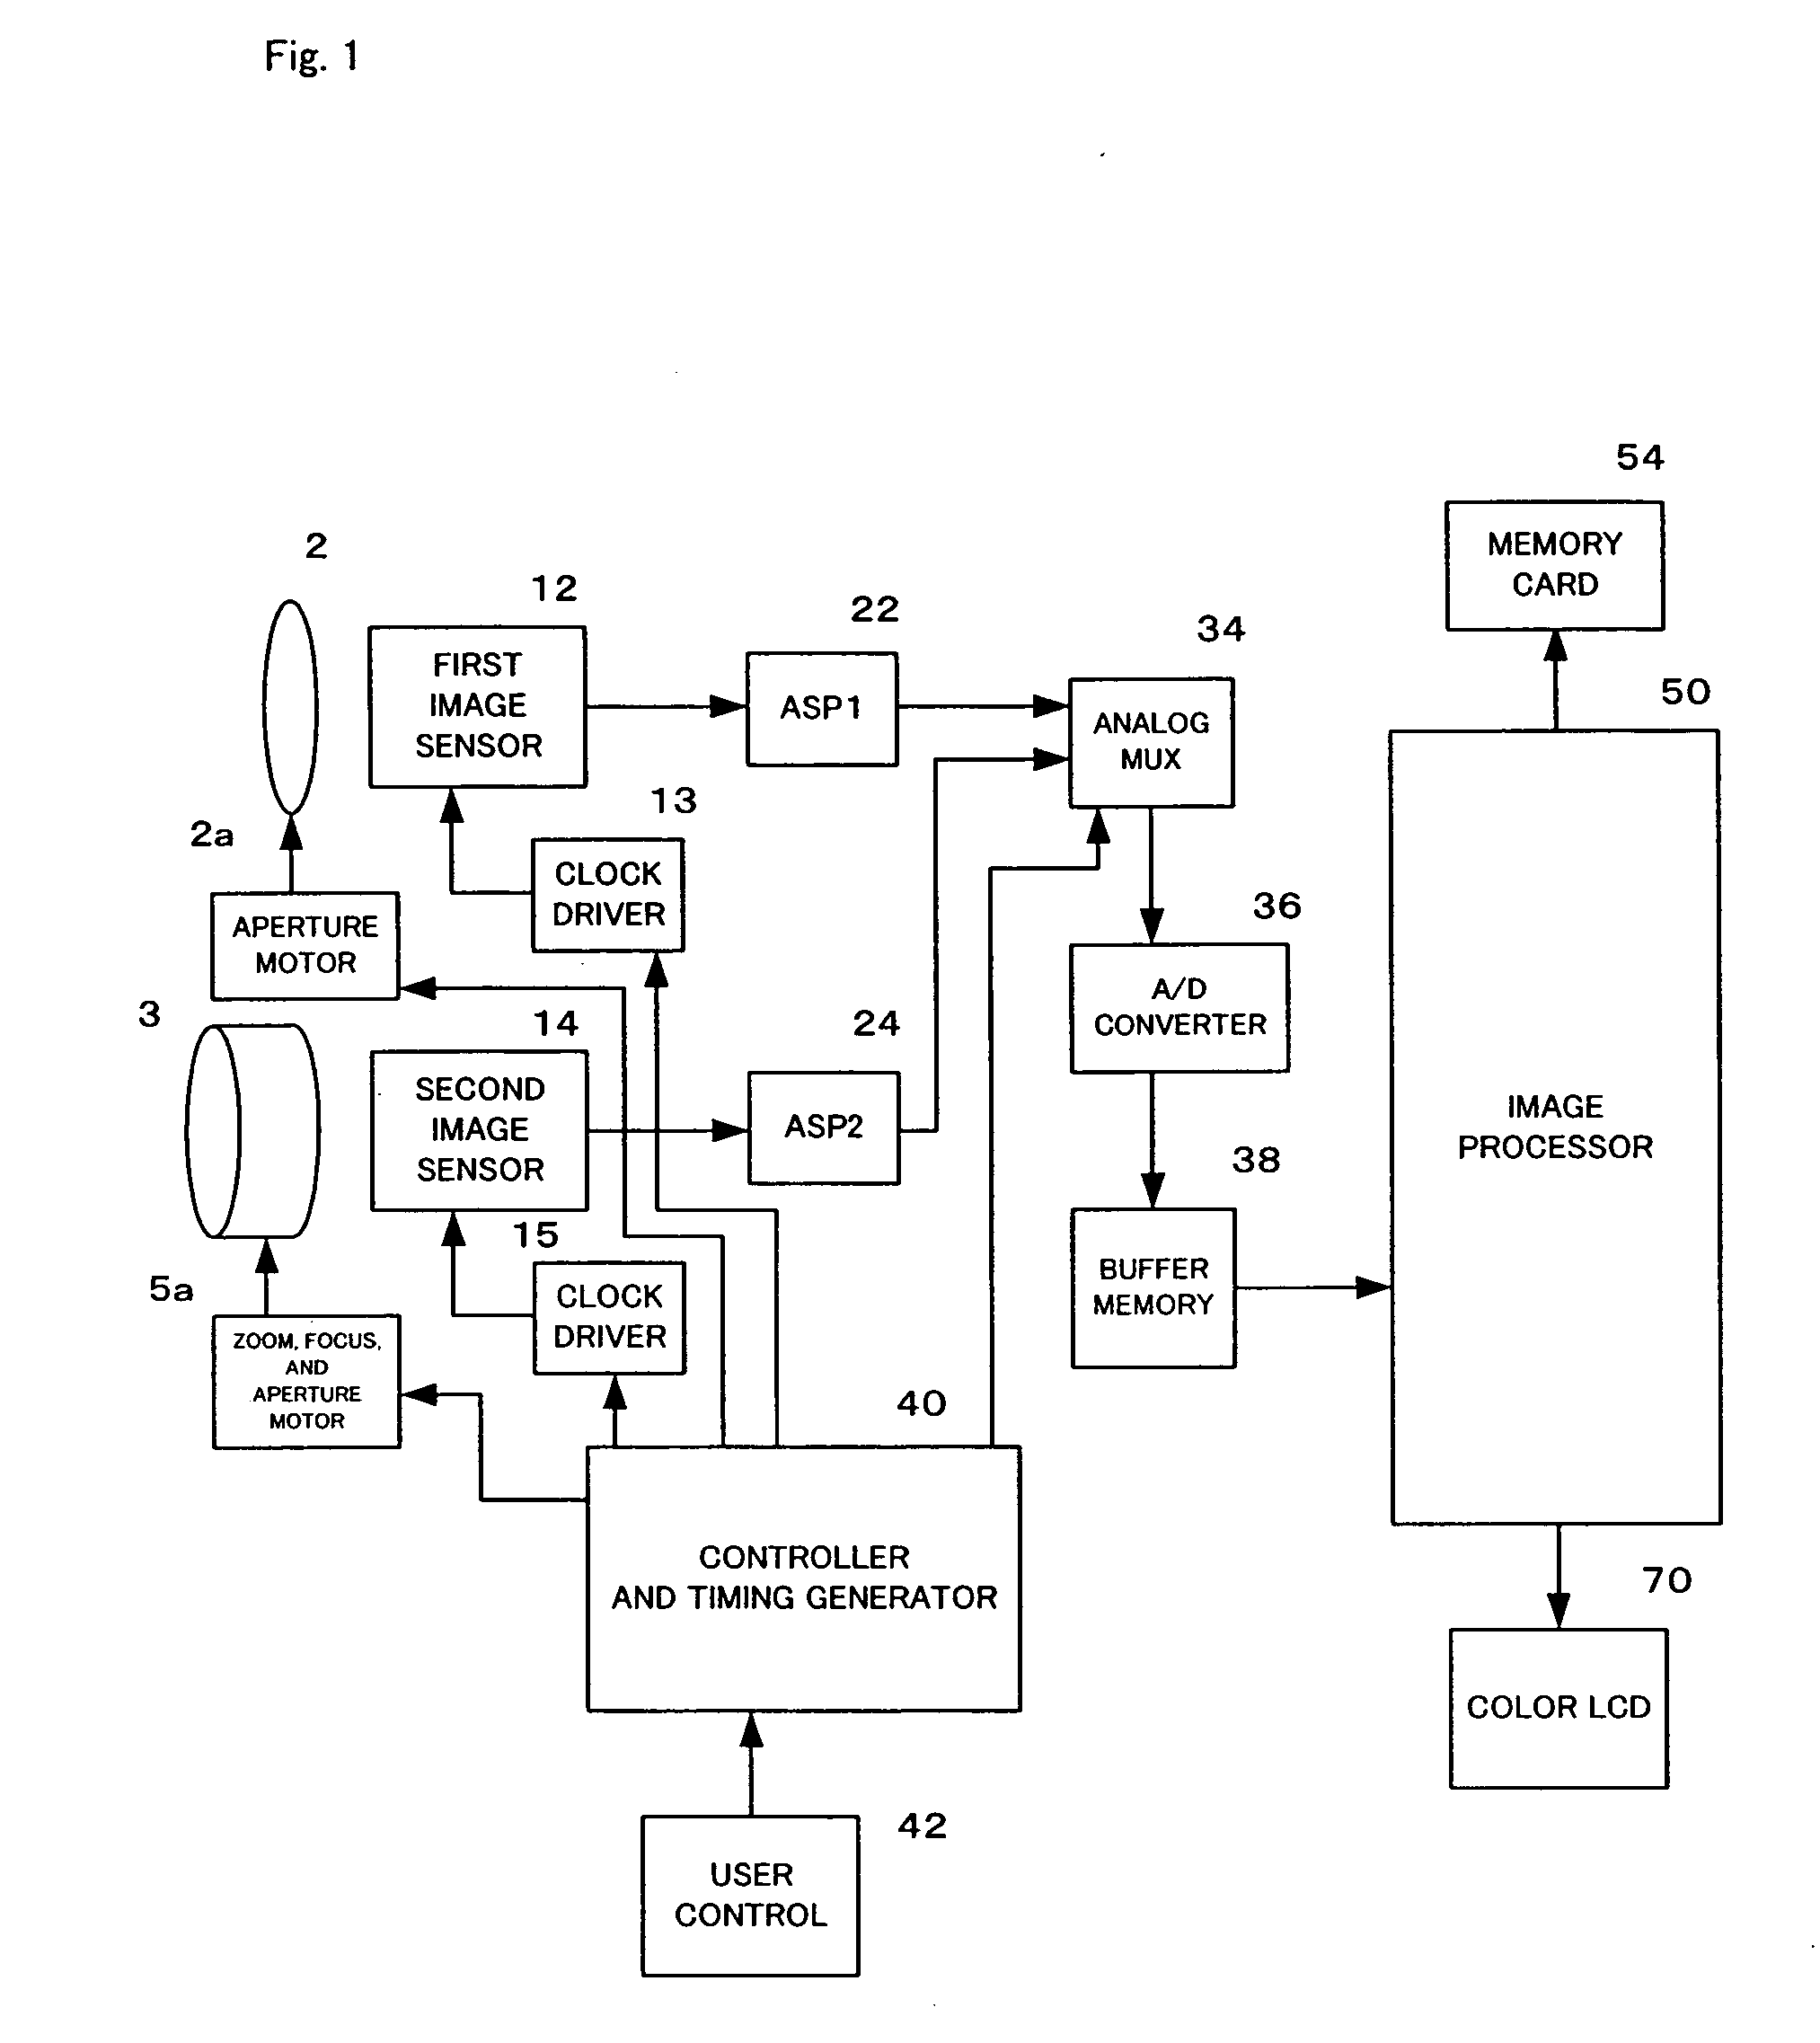 Image capturing device having multiple optical systems